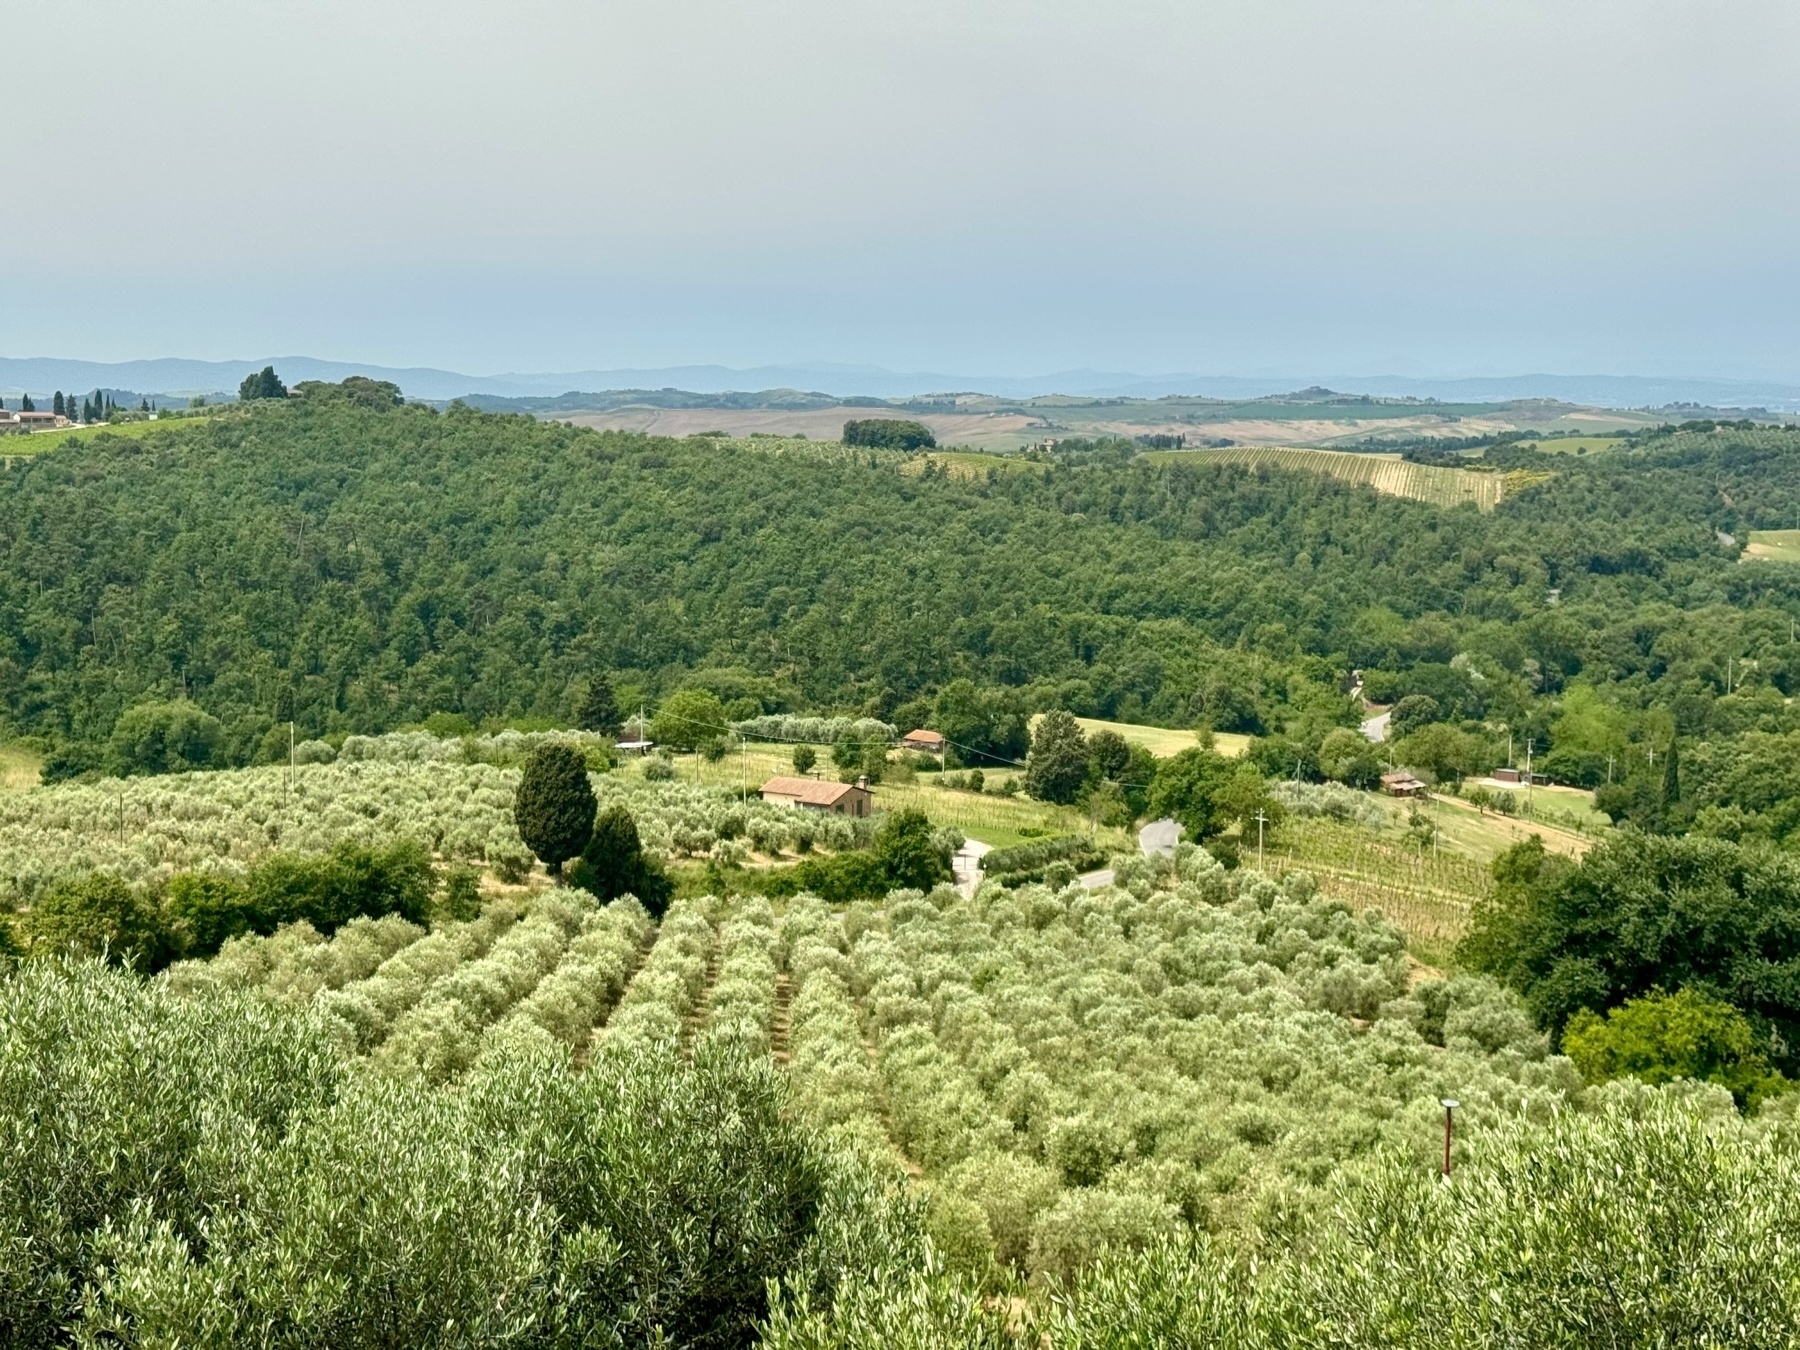 A scenic landscape featuring a lush, green valley with rows of olive trees and dense forest-covered hills. Scattered houses are visible, nestled among the trees, and mountains can be seen in the distance under a clear sky.